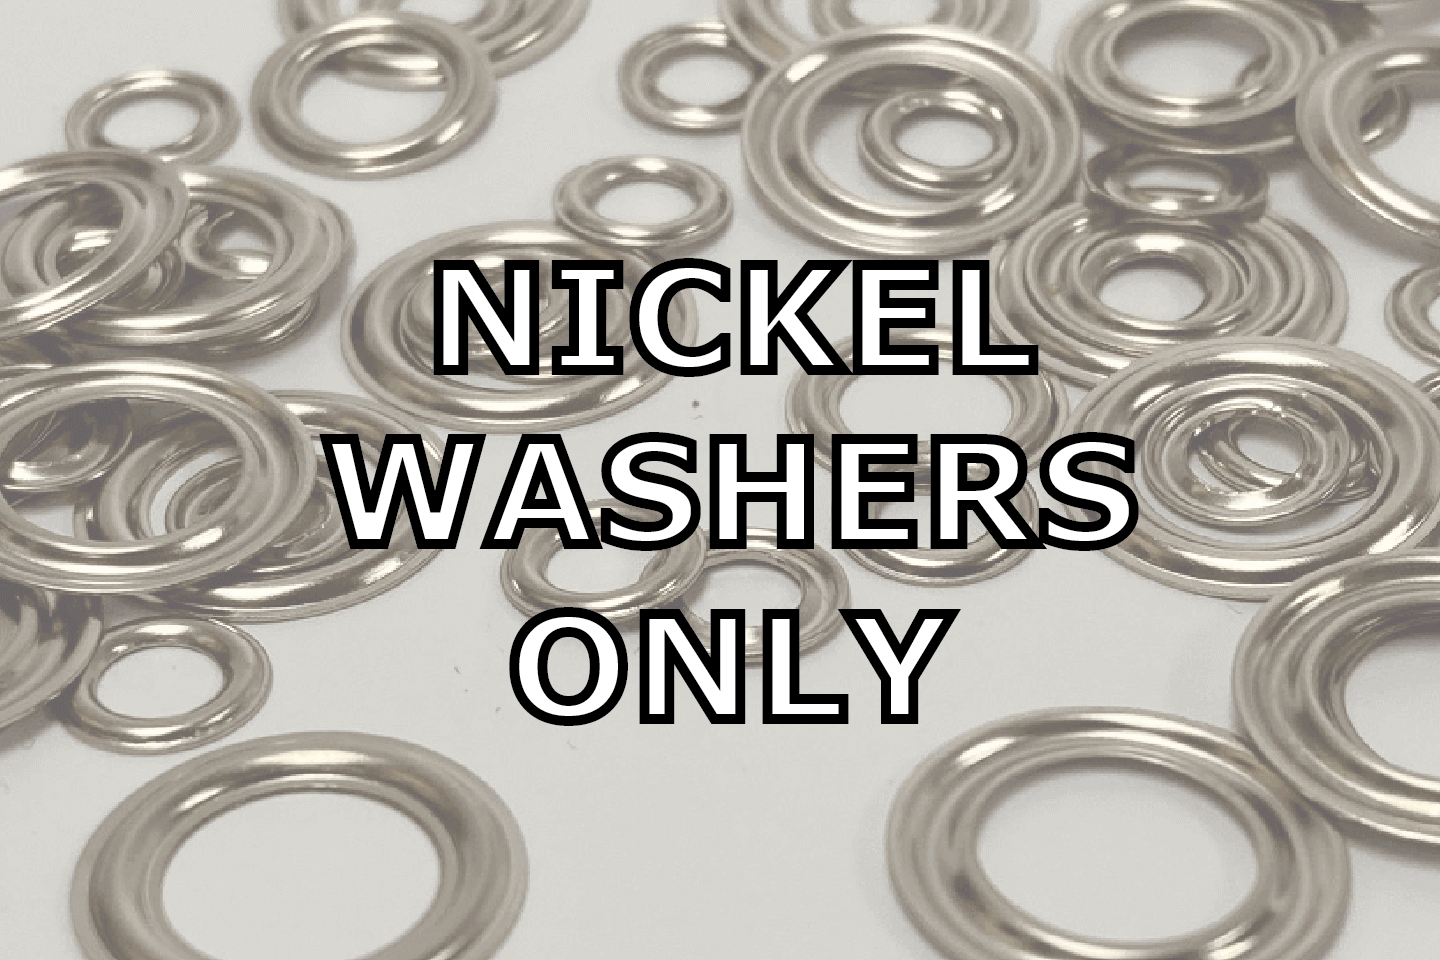 Nickel Washers Only